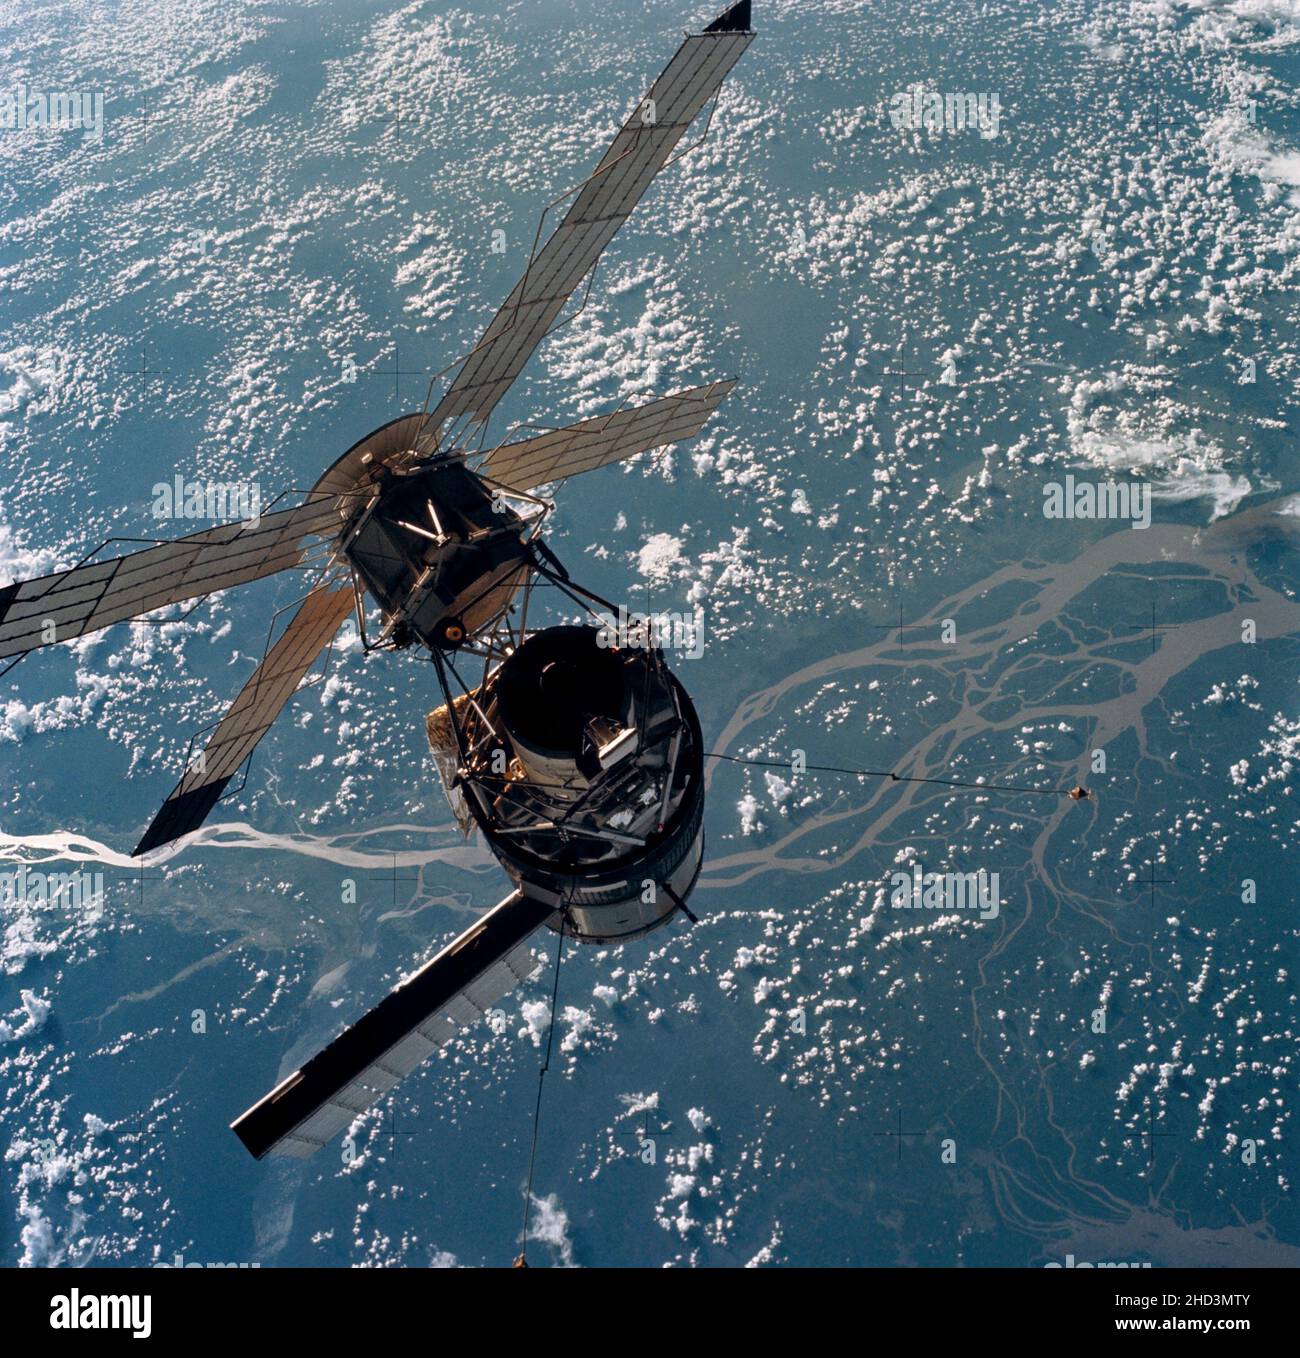 (28 July 1973) --- A close-up view of the Skylab space station photographed against an Earth background from the Skylab 3 Command and Service Modules (CSM) during station-keeping maneuvers prior to docking. Aboard the Command Module (CM) were astronauts Alan L. Bean, Owen K. Garriott and Jack R. Lousma, who remained with the Skylab Space Station in Earth orbit for 59 days. This picture was taken with a hand-held 70mm Hasselblad camera using a 100mm lens and SO-368 medium speed Ektachrome film. Note the one solar array system wing on the Orbital Workshop (OWS) which was successfully deployed du Stock Photo